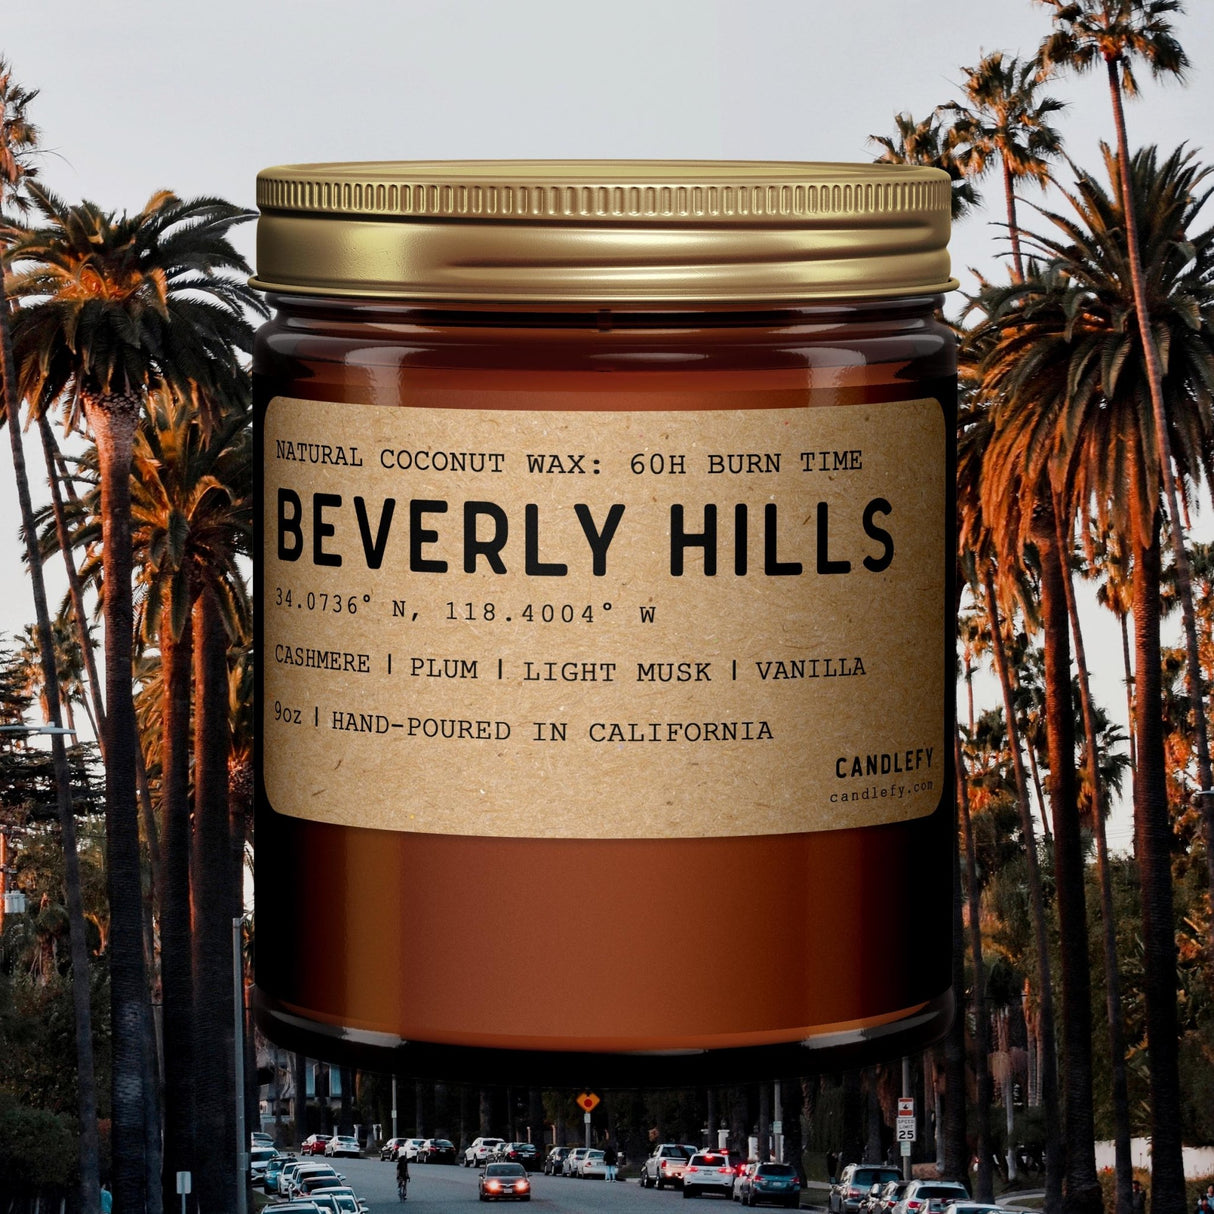 Beverly Hills: California Scented Candle (Cashmere, Plum, Musk) - Candlefy